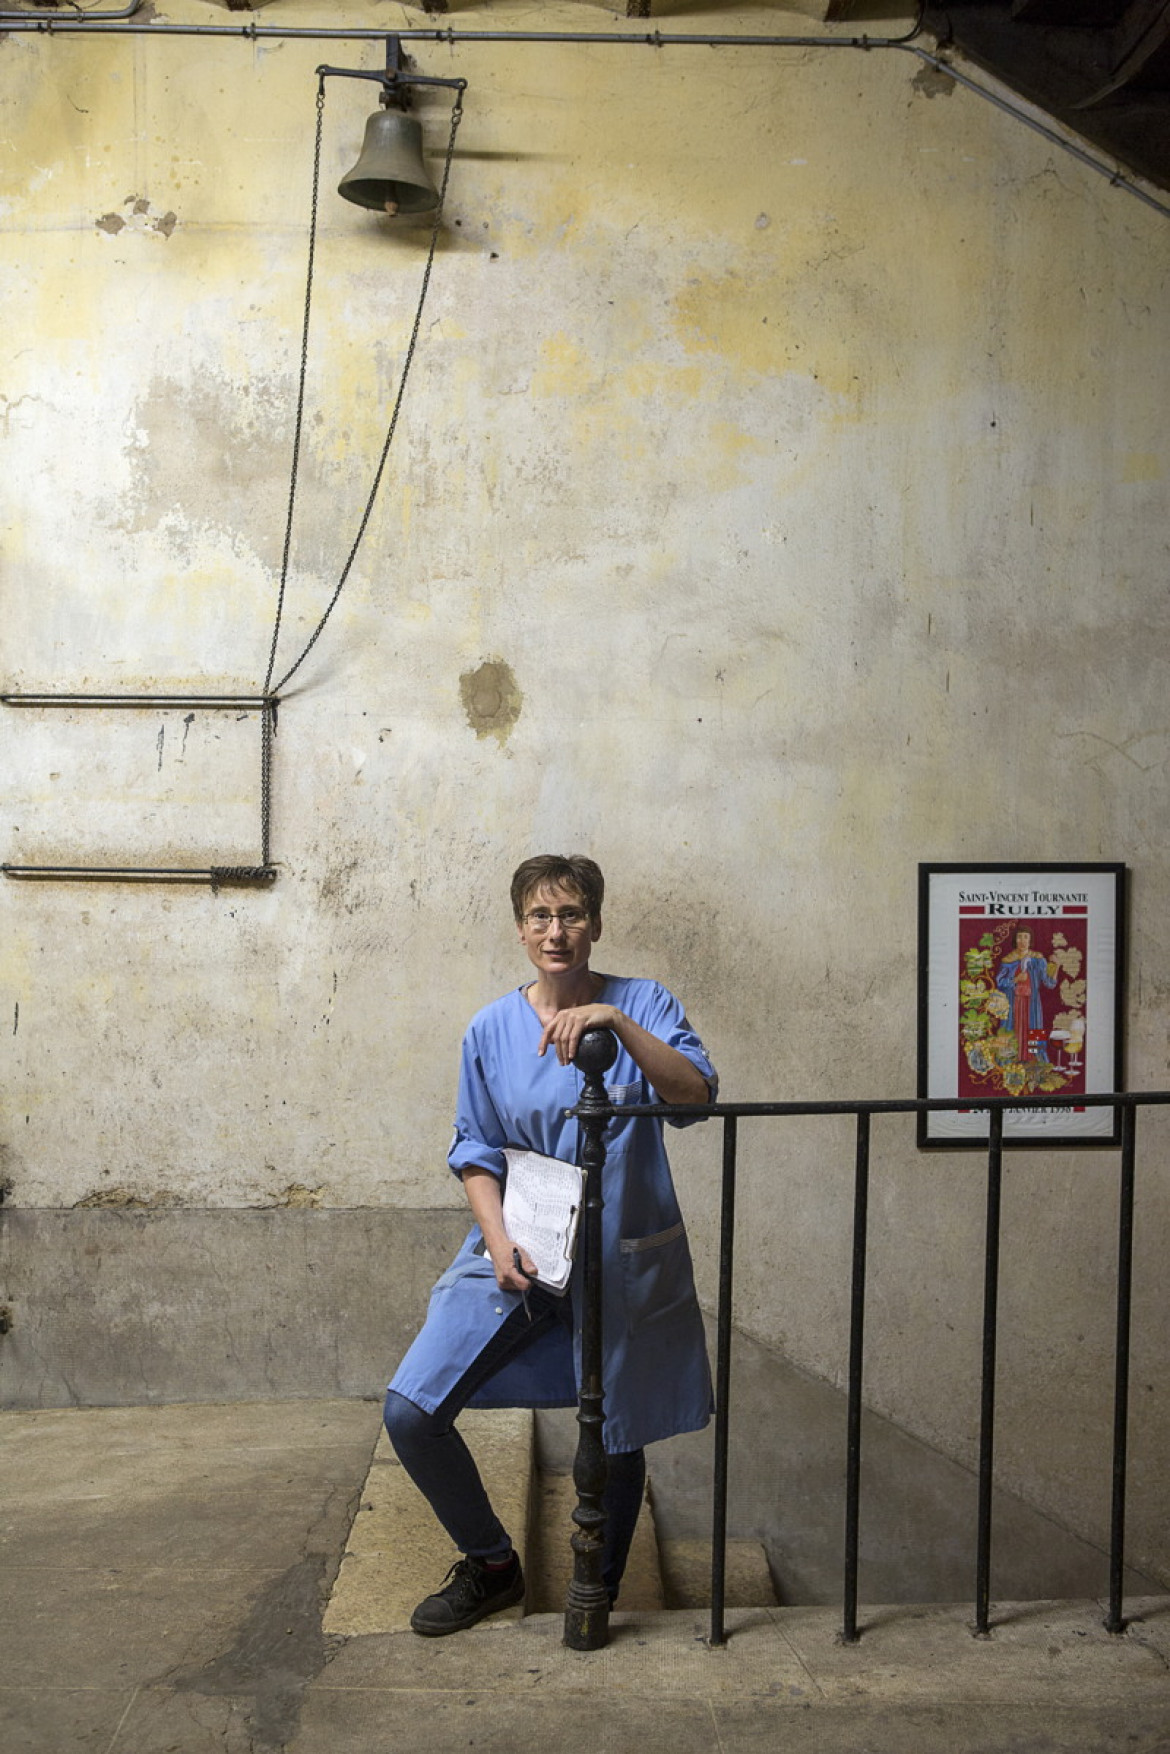 fot. Thierry Gaudillere, "Worker at Maison Champy", 1. miejsce w kategorii Errazuriz Wine Photographer of the Year - People